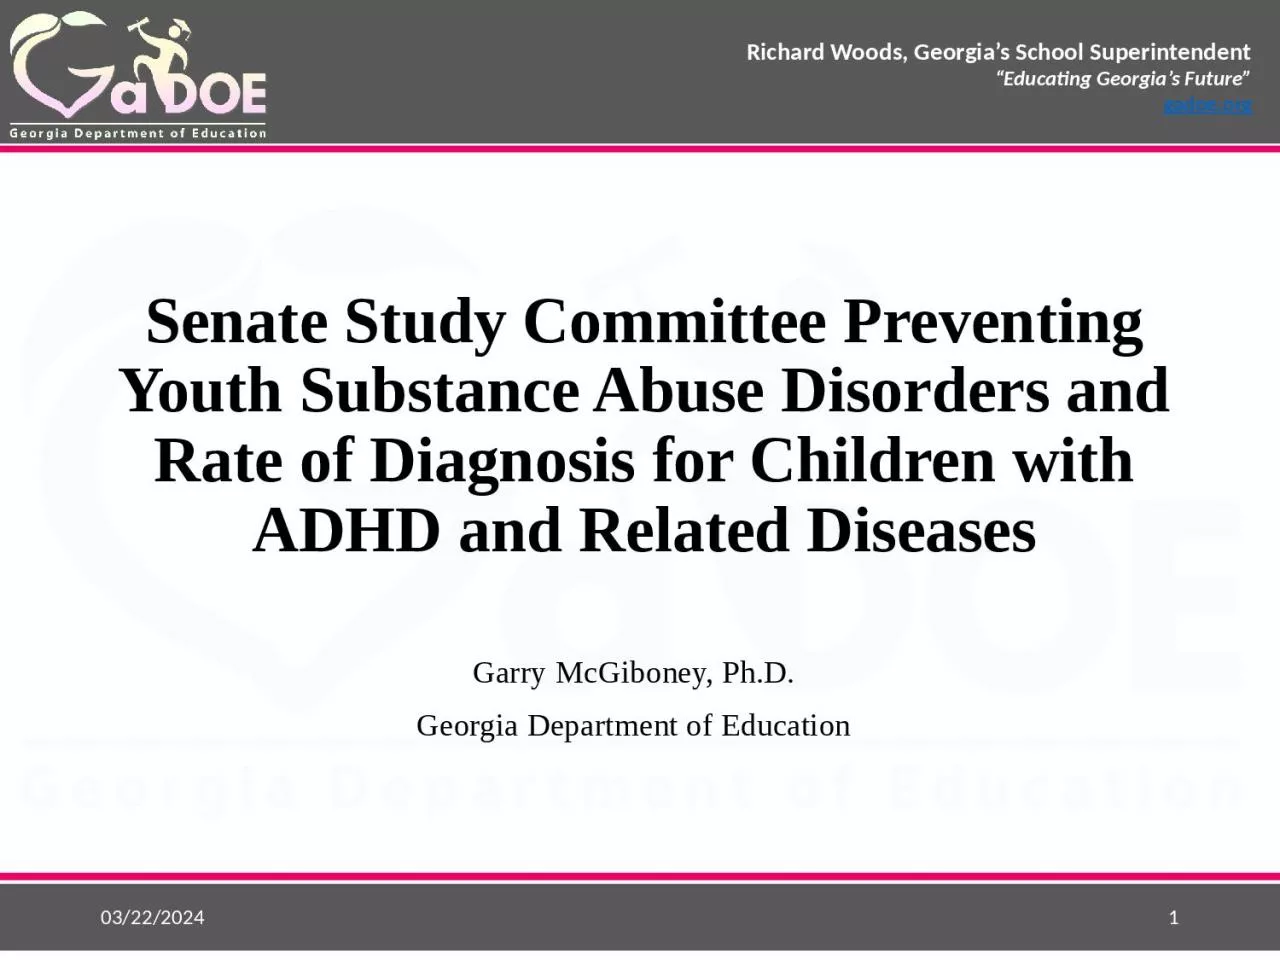 Senate Study Committee Preventing Youth Substance Abuse Disorders and Rate of Diagnosis